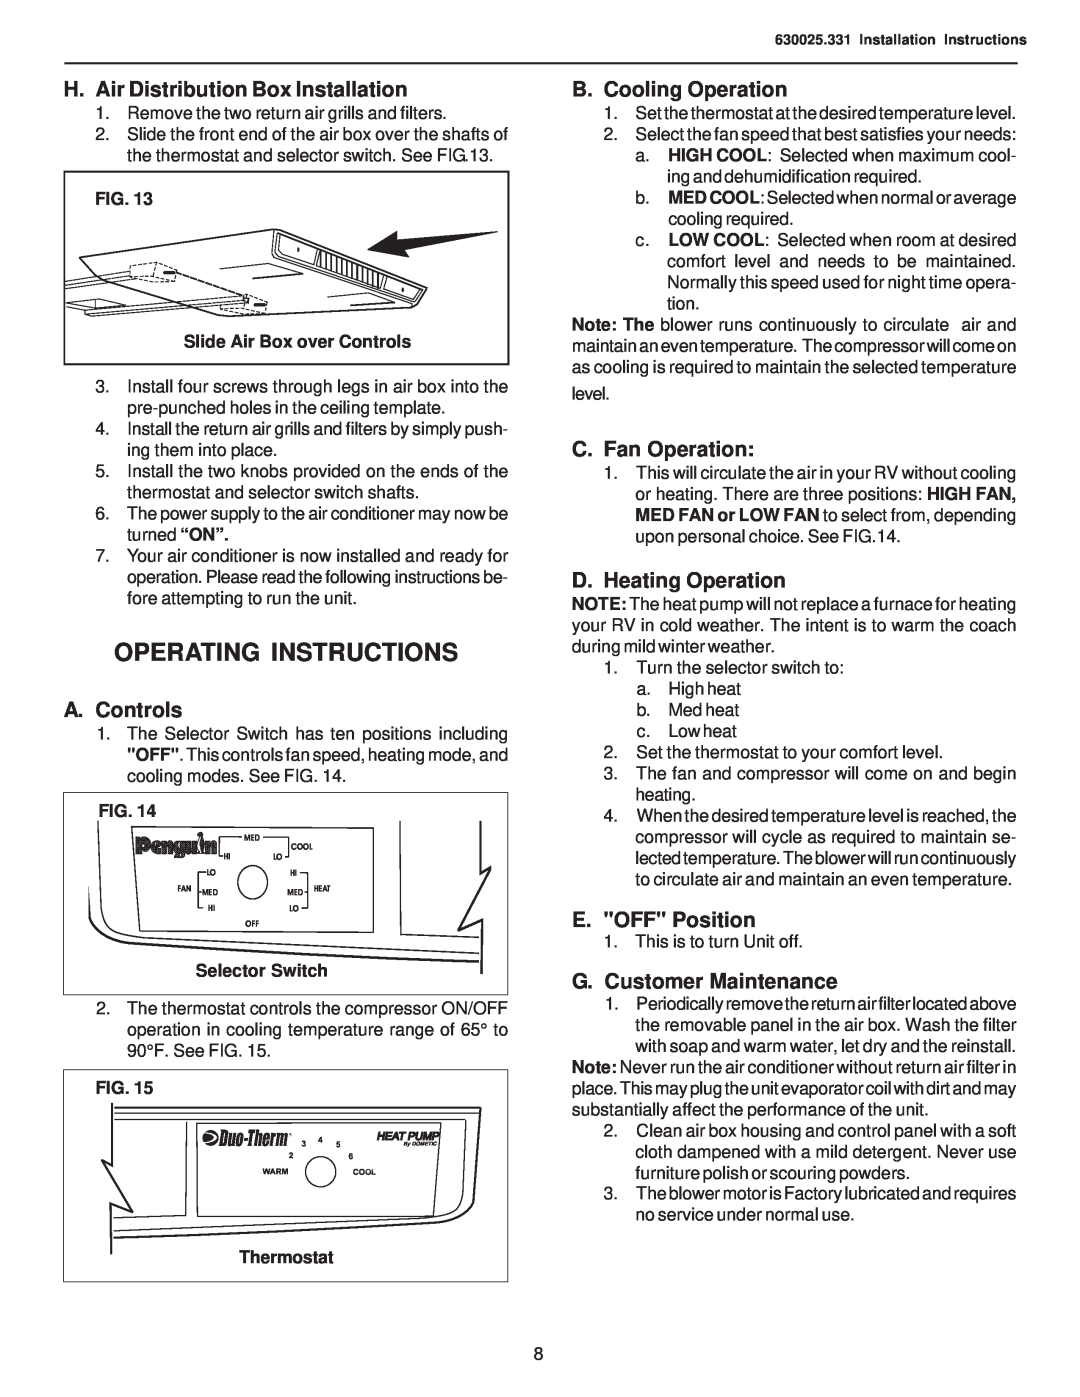 Dometic 630025.331 Operating Instructions, H.Air Distribution Box Installation, A.Controls, B.Cooling Operation 